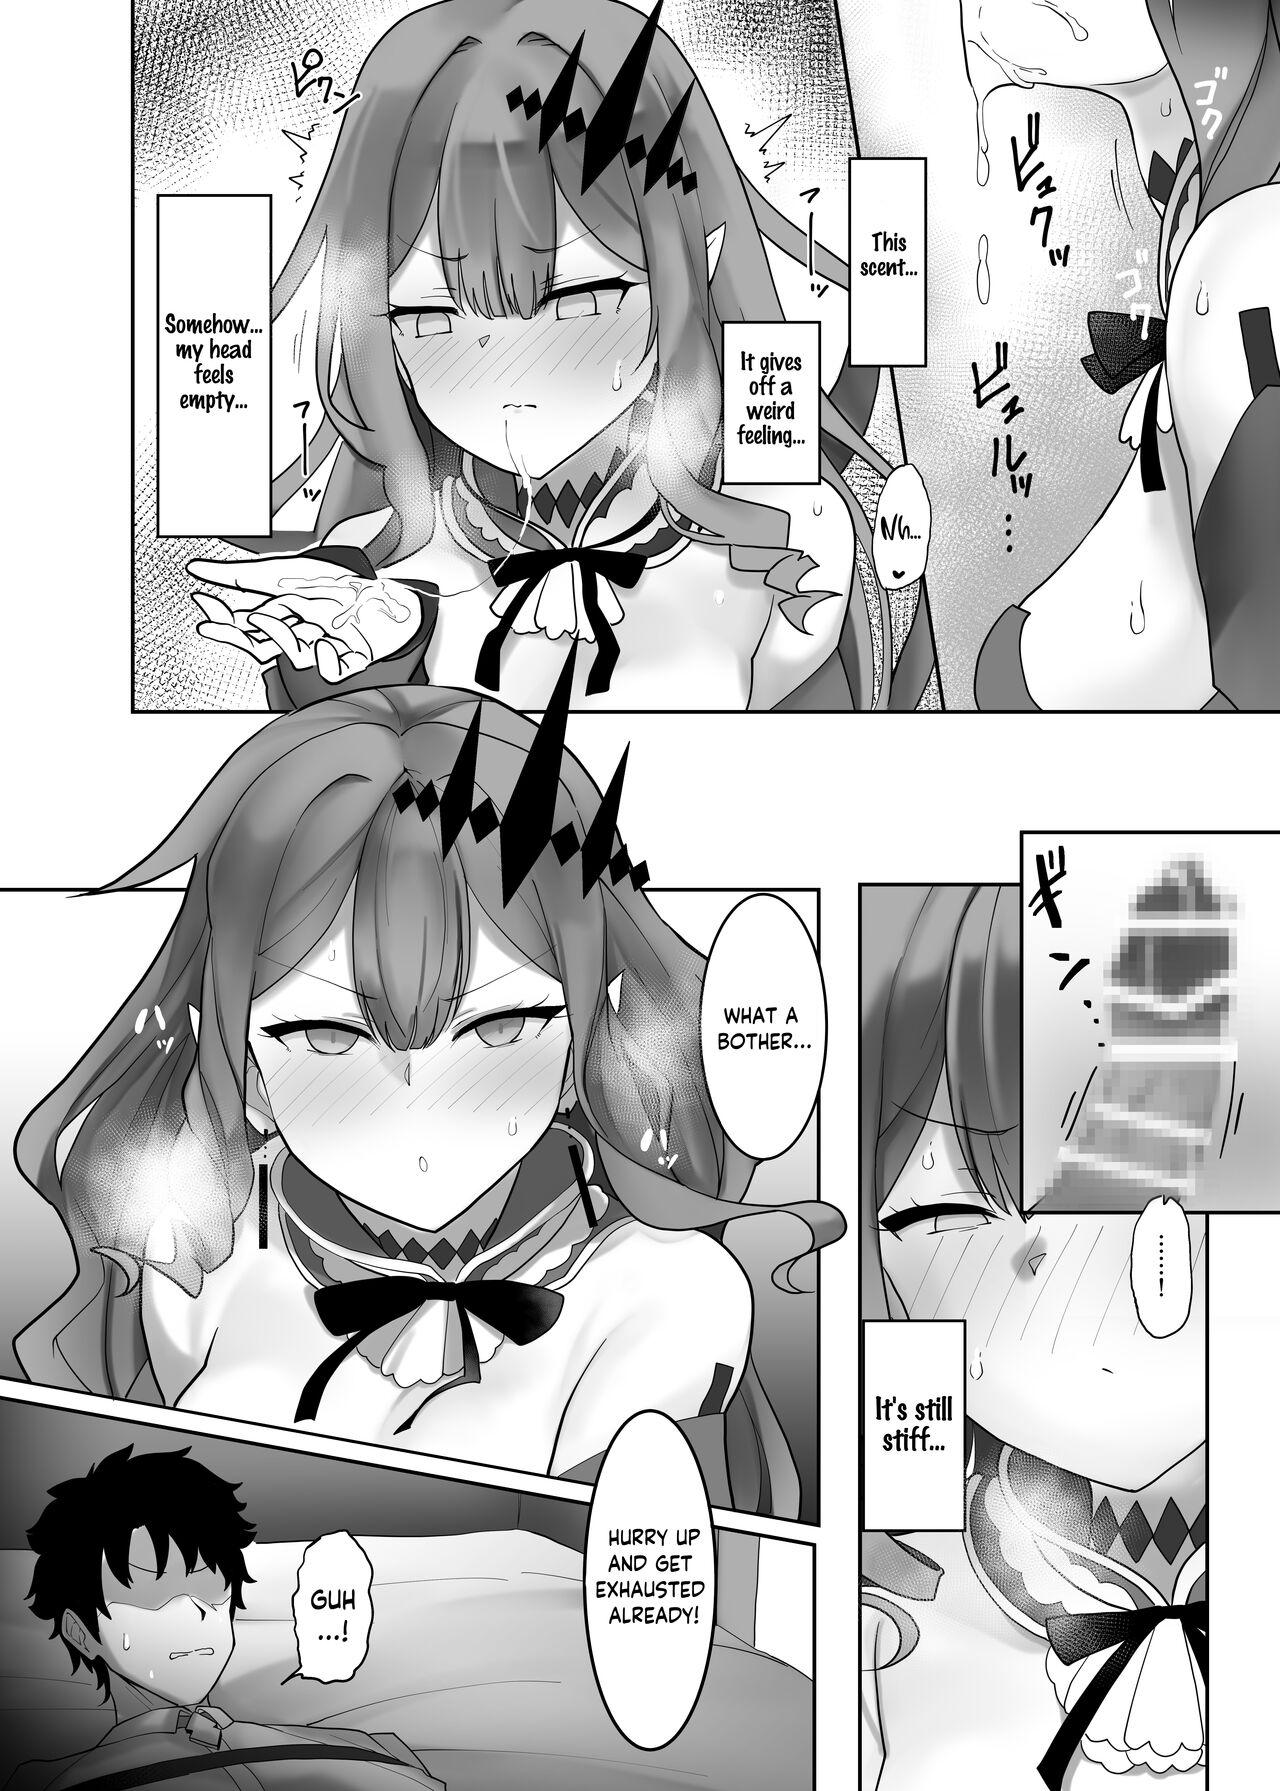 Perfect Butt Making Fairy Knight Tristan Understand - Fate grand order Couple Fucking - Page 7